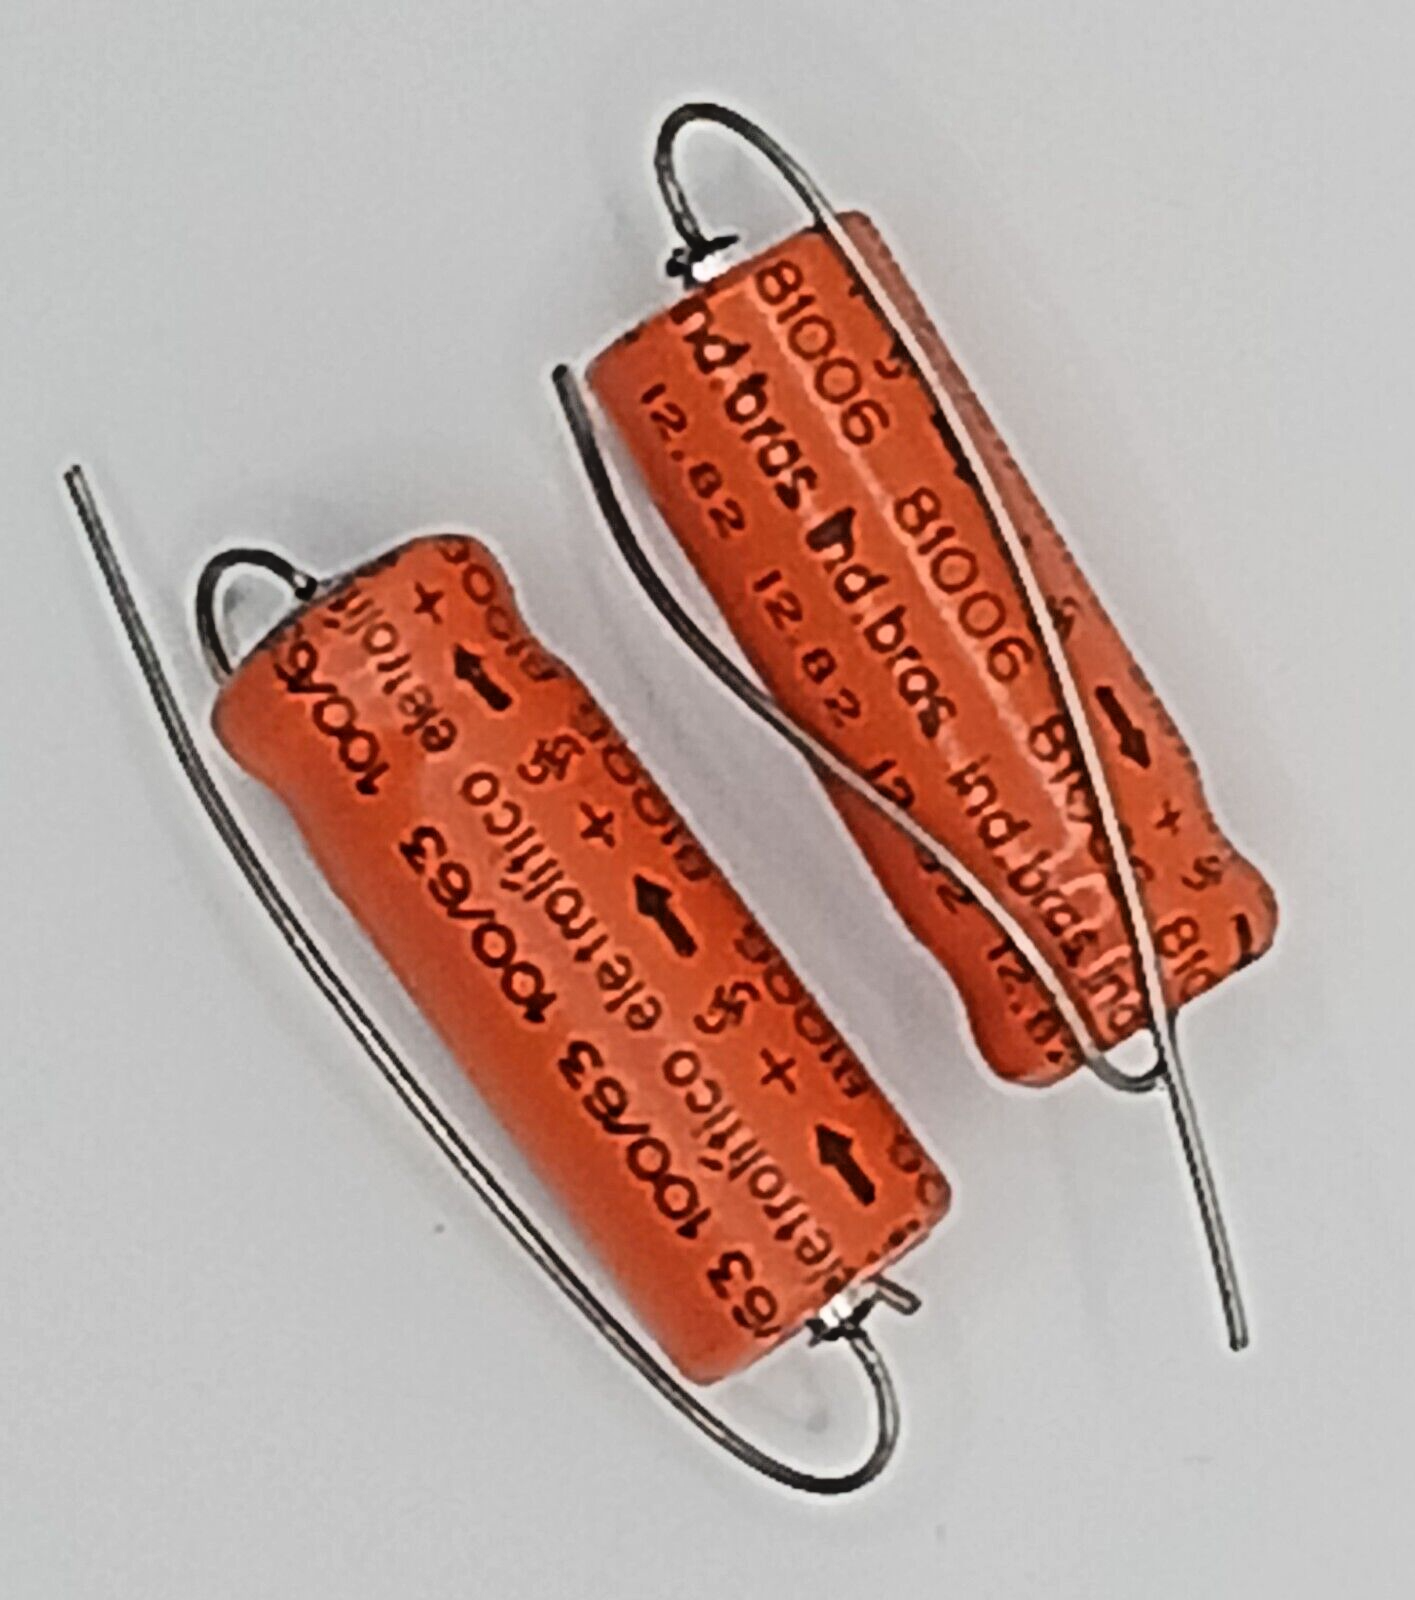 Primary image for Unbranded Capacitors 100/63 81006 02.83 2 Pc Lot